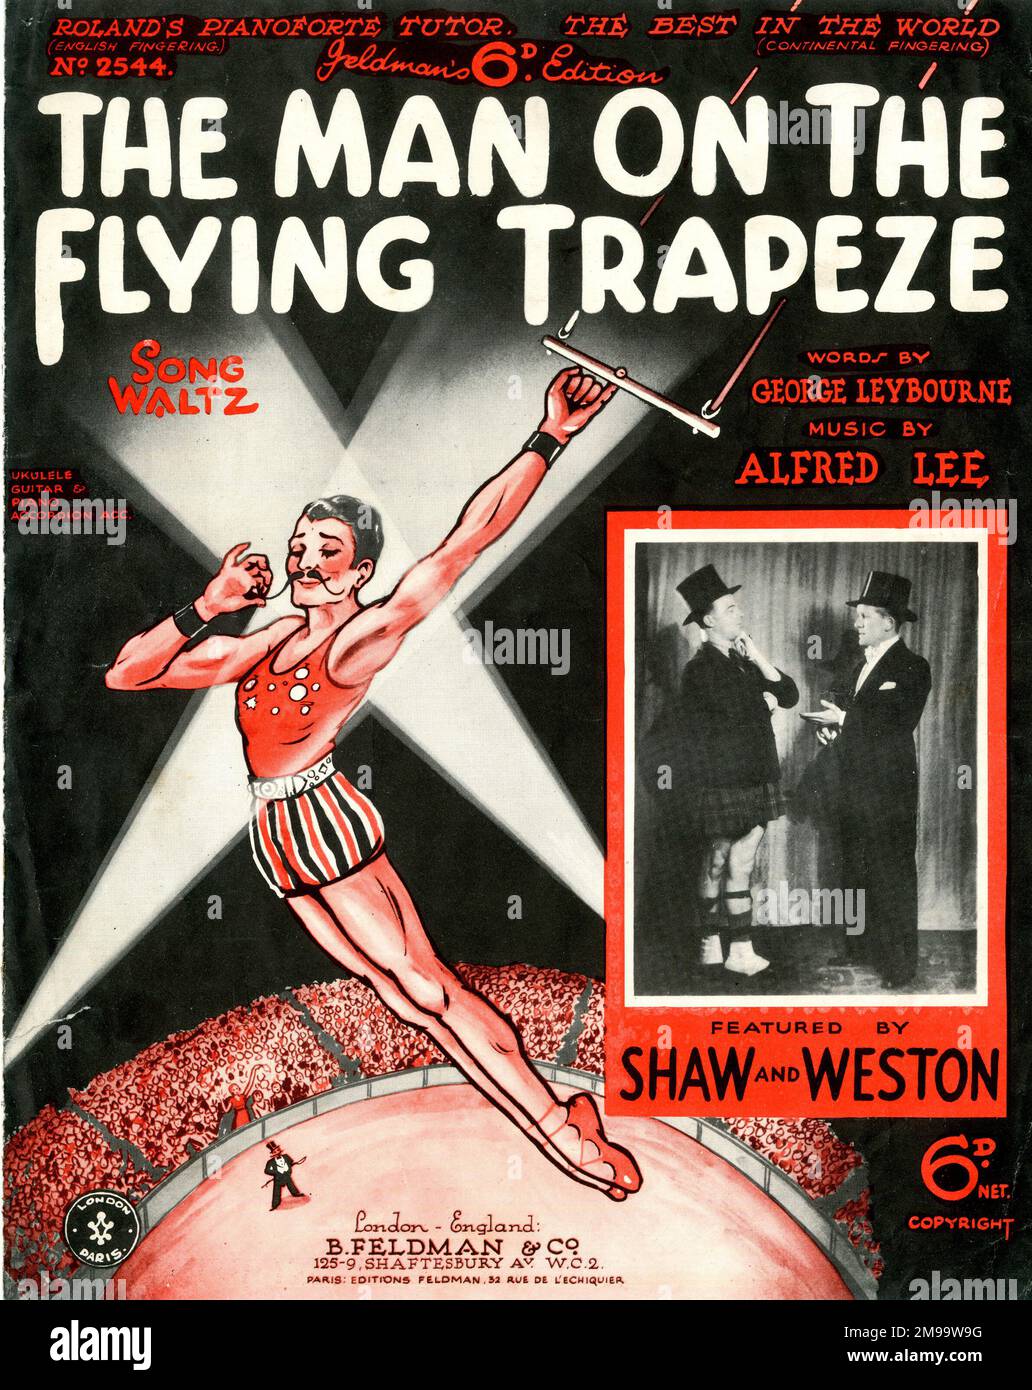 Music cover, The Man on the Flying Trapeze, song waltz, words by George Leybourne, music by Alfred Lee, performed by Shaw and Weston. Stock Photo